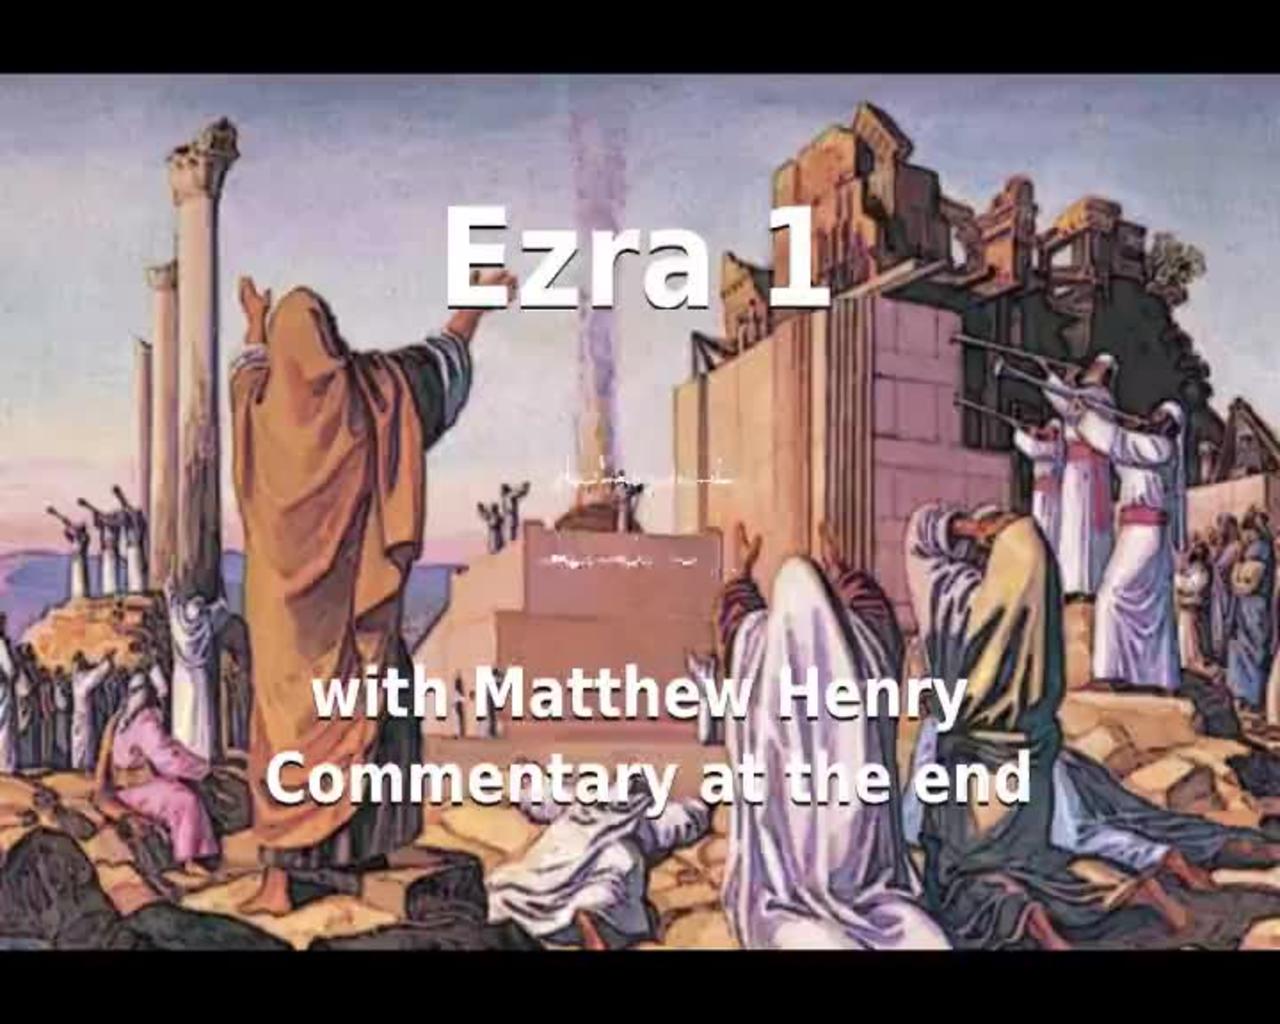 📖🕯 Holy Bible - Ezra 1 with Matthew Henry Commentary at the end.